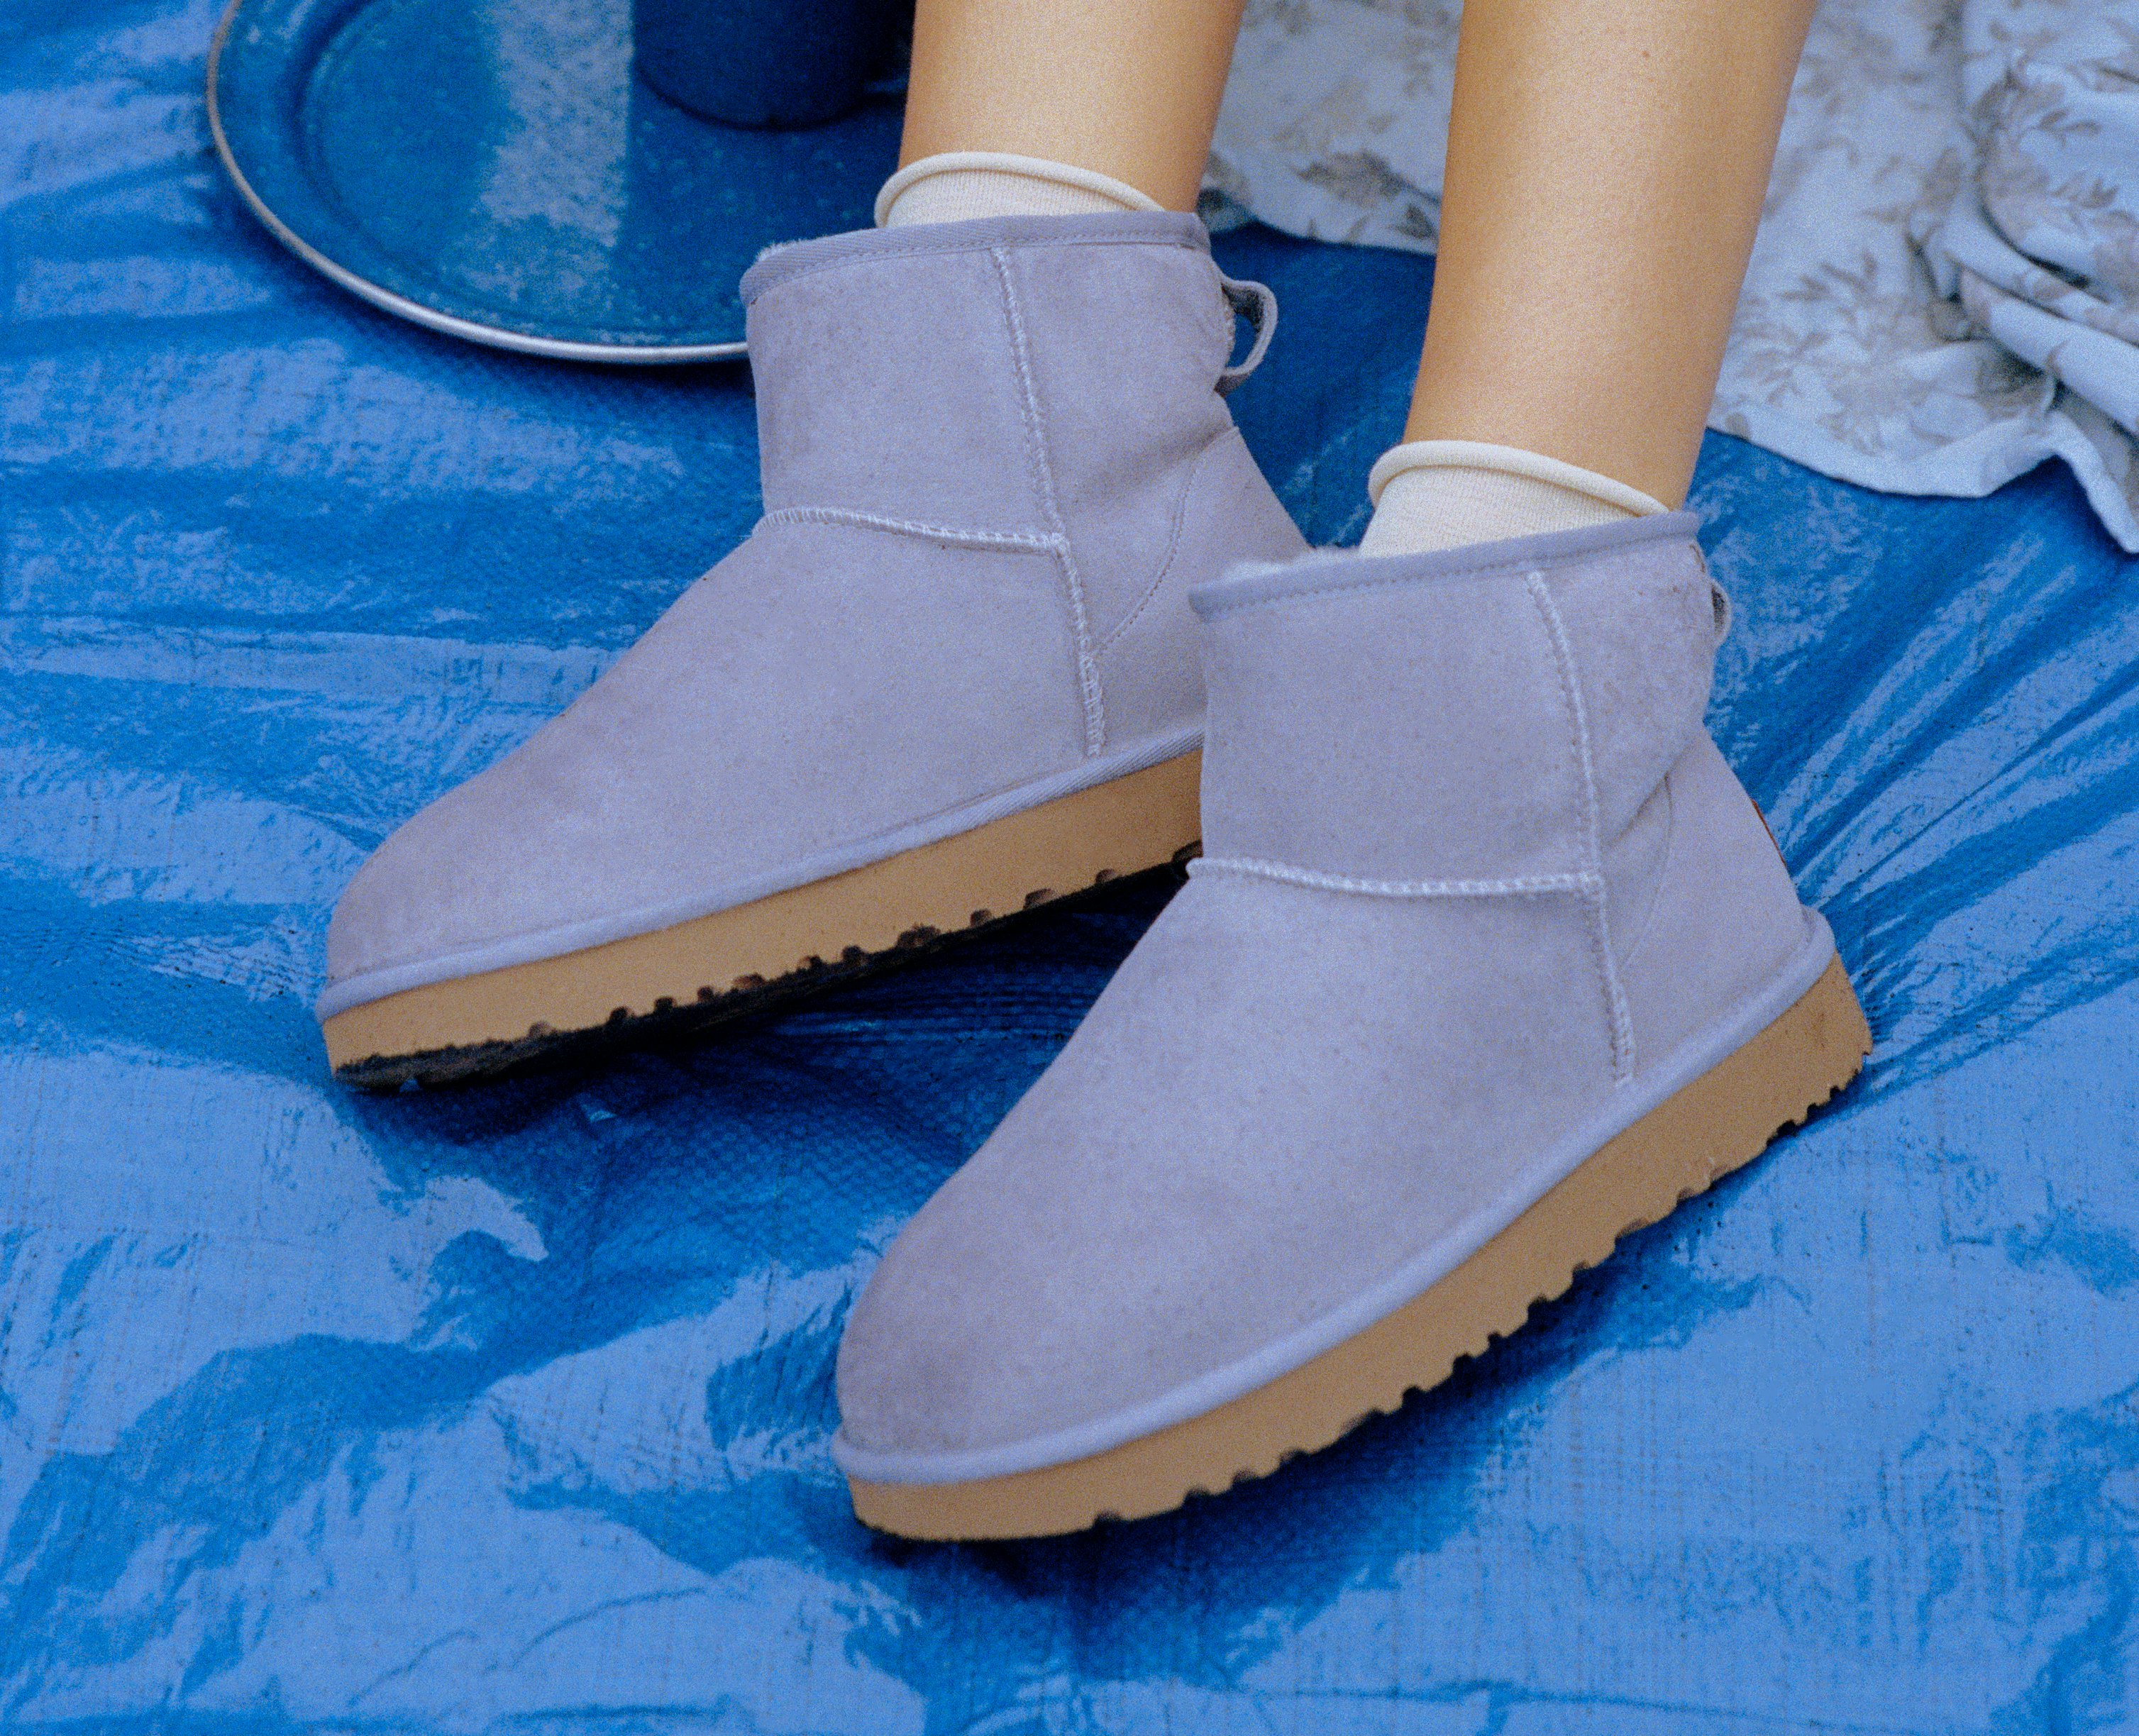 ugg urban outfitters